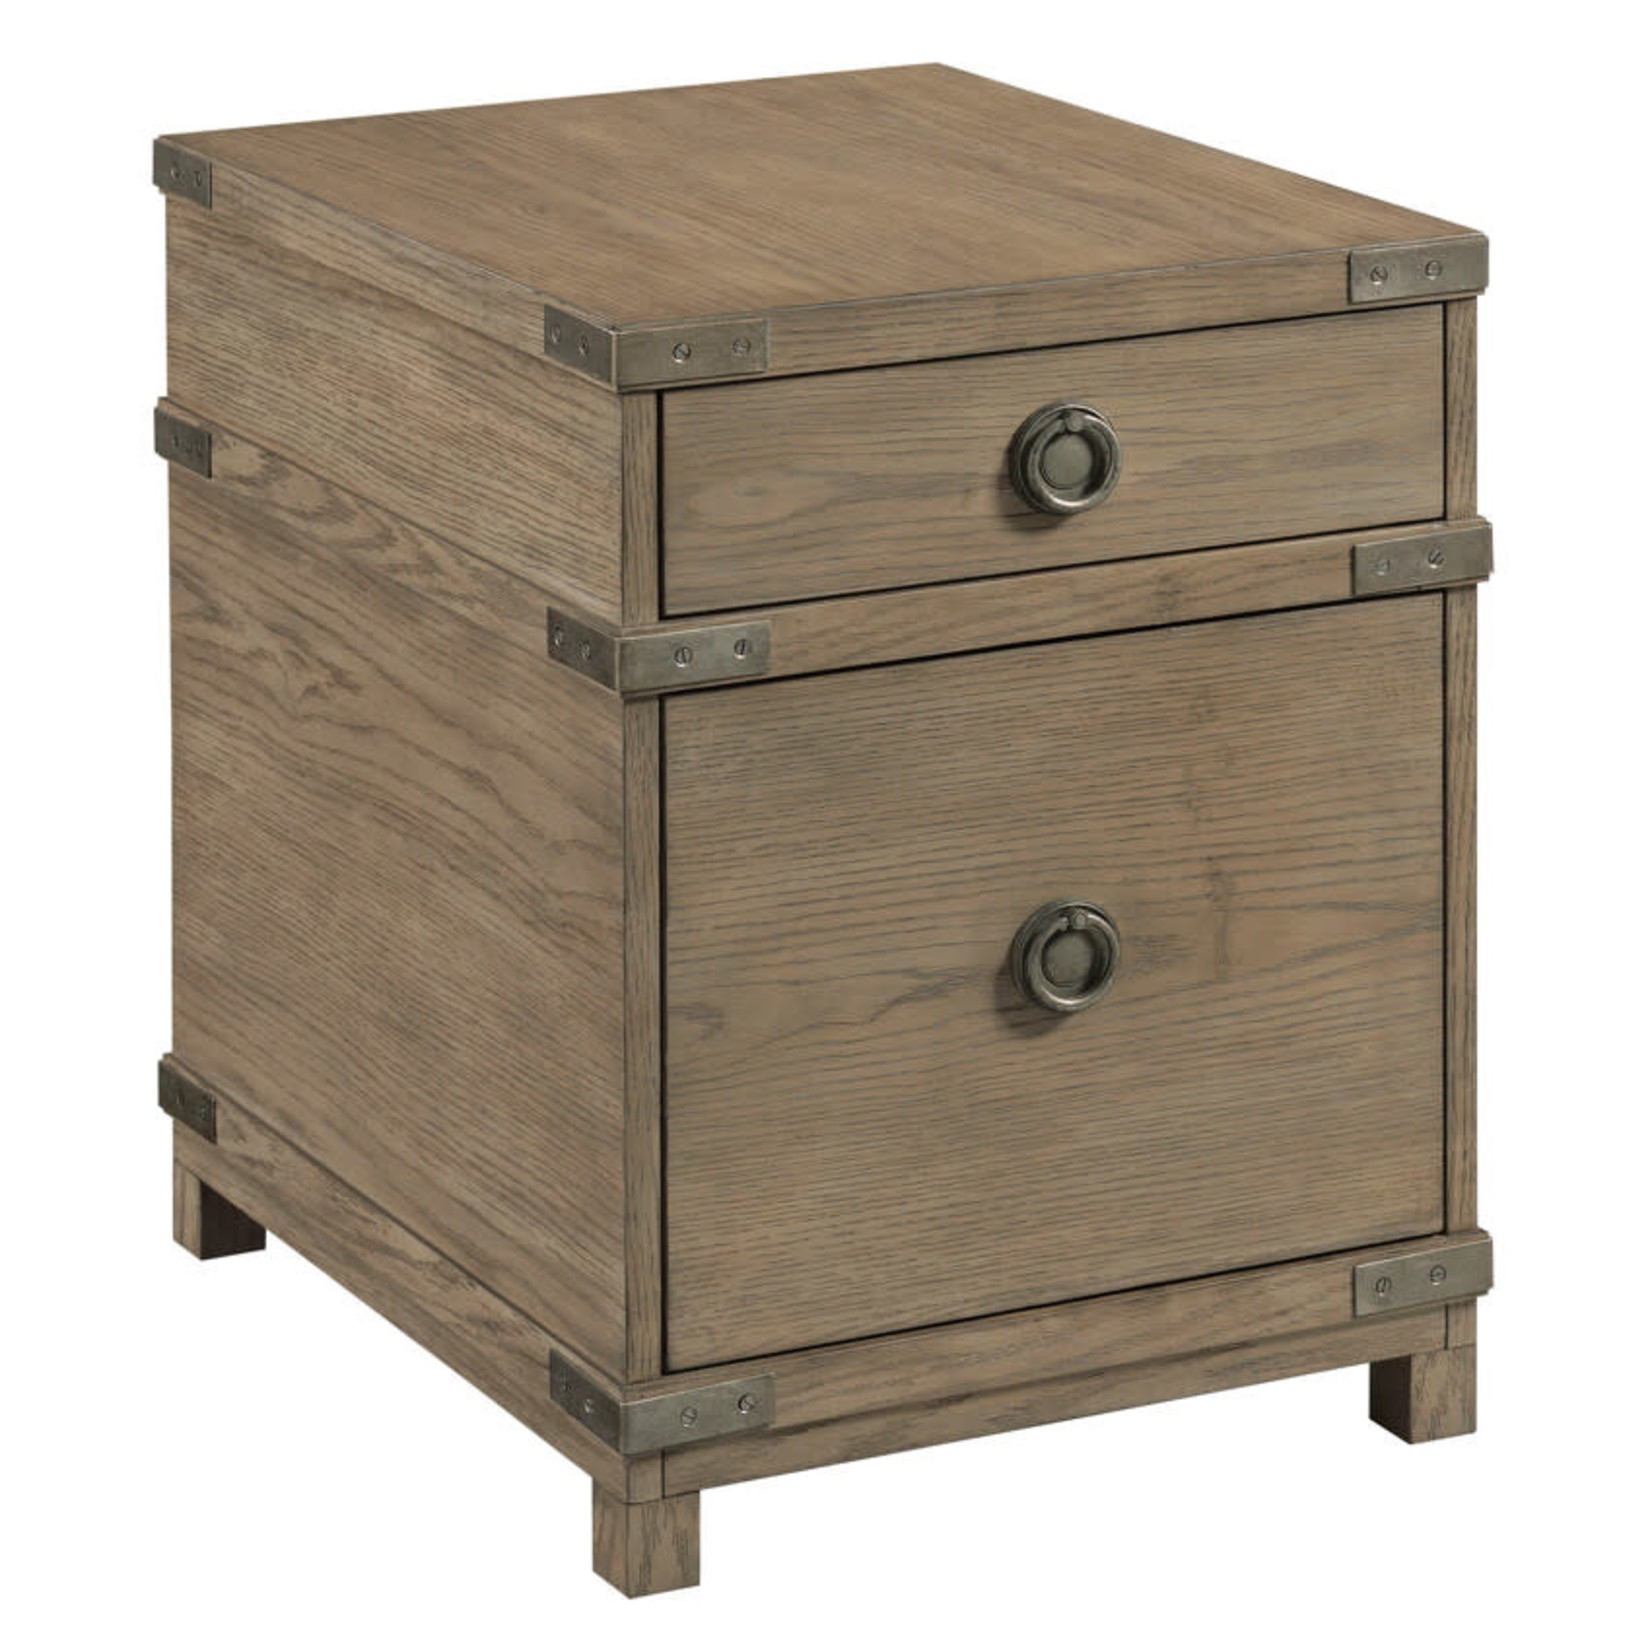 Hammary Crawford Trunk Chairside Table